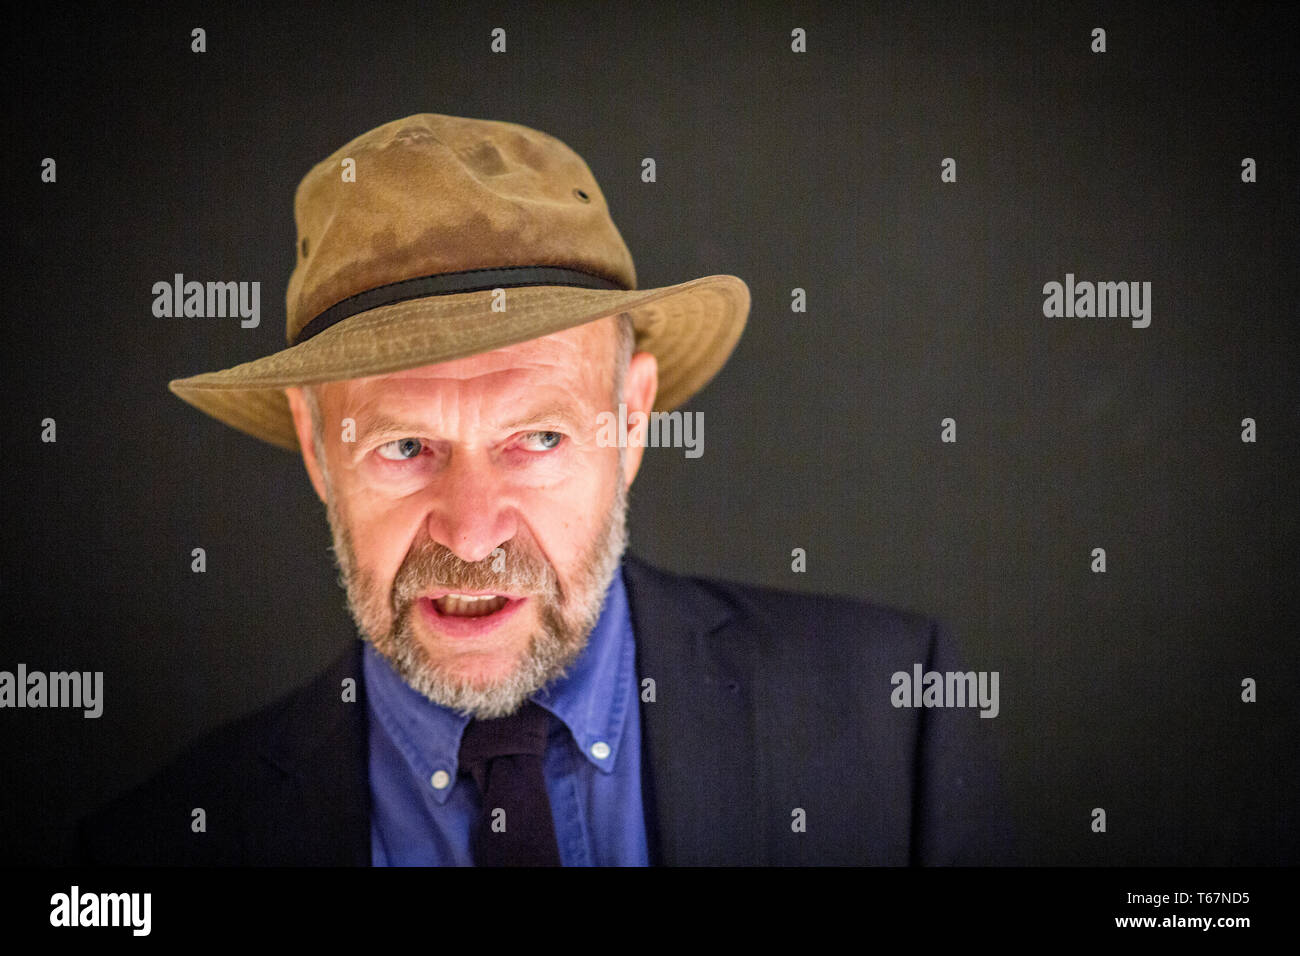 Climateology Researcher and adjunct professor at the Columbia University James Hansen urges young people to act on climate change. He fails politicians and leaders in taking action. Here he speaks at a seminar held by Youth for Sustainable Development Goals at Columbia University. Stock Photo